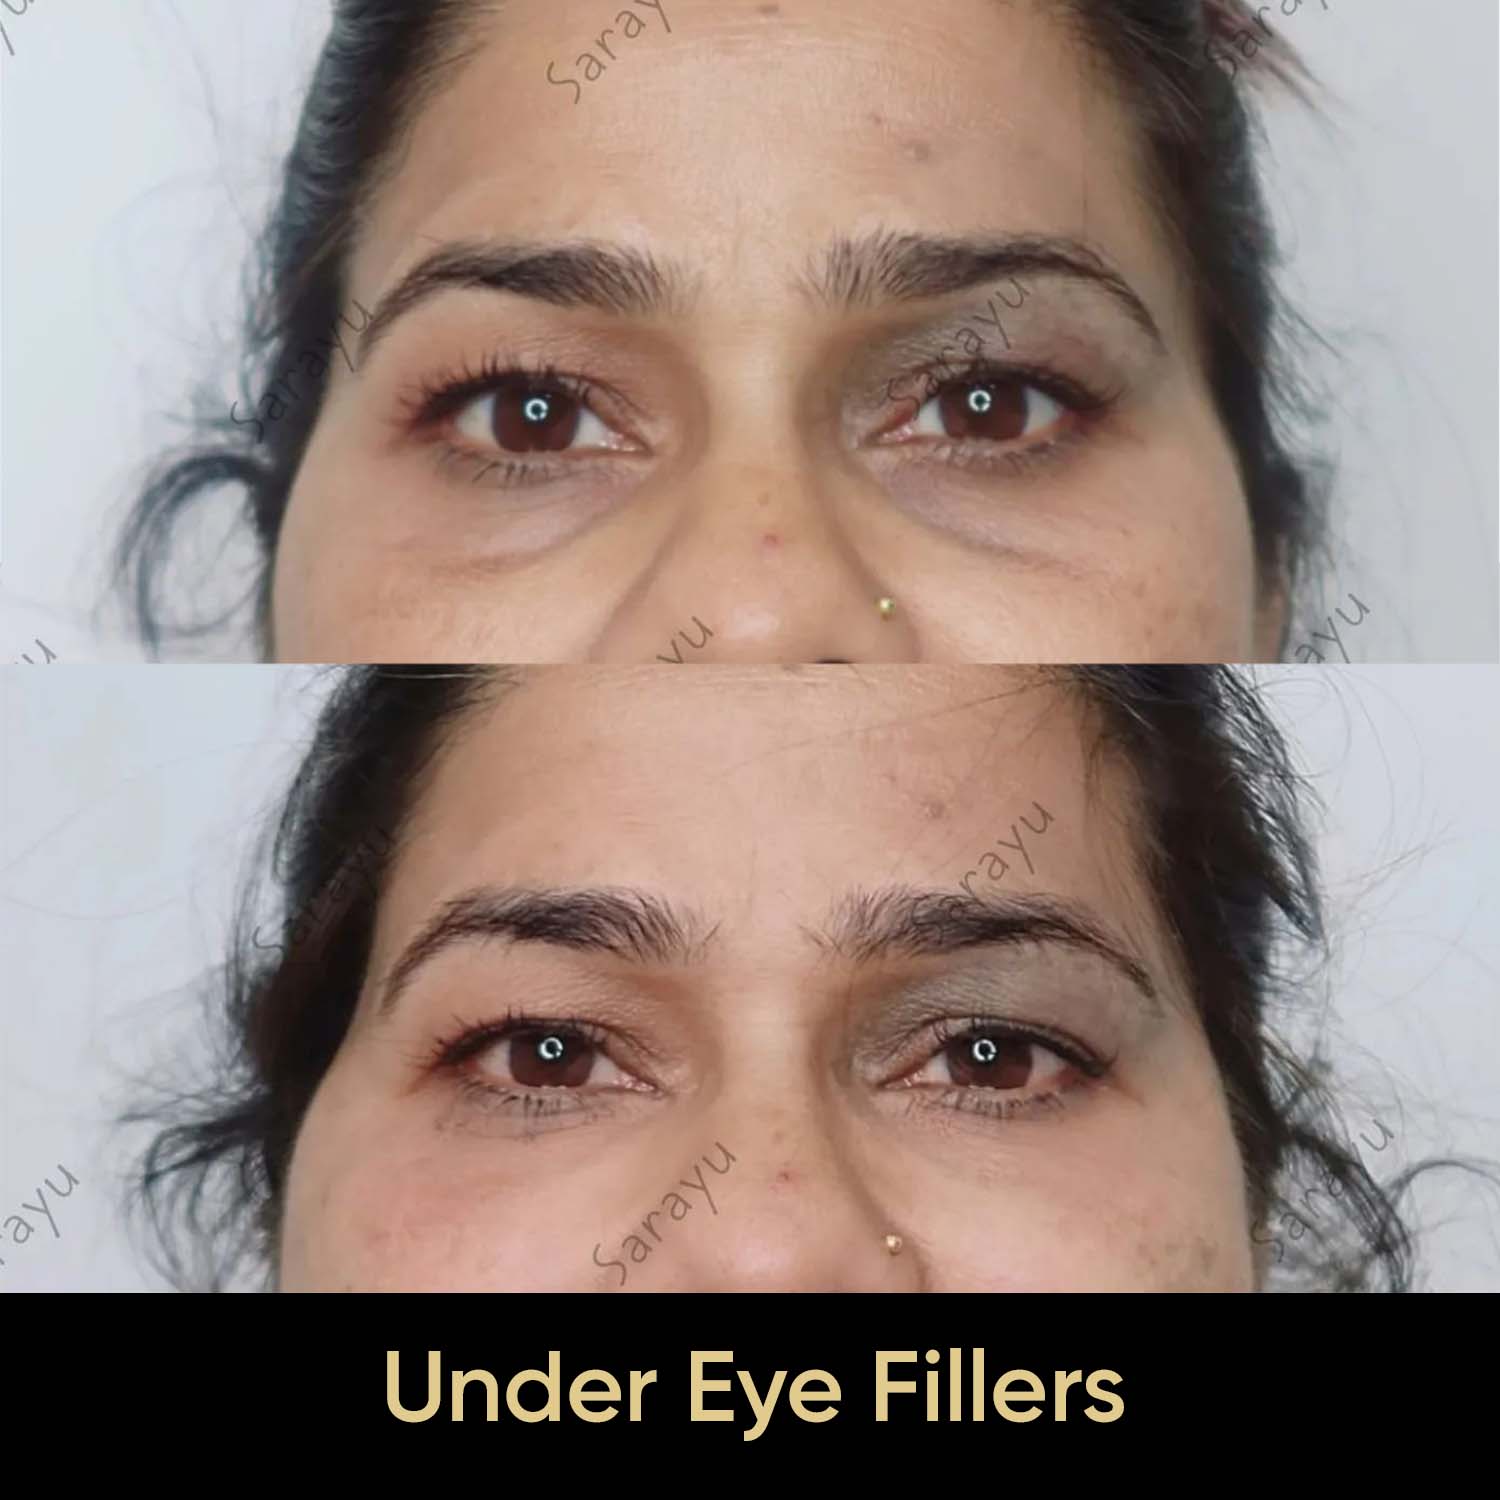 Close-up of a person's face with improved under-eye area smoothness and reduced appearance of dark circles/puffiness.